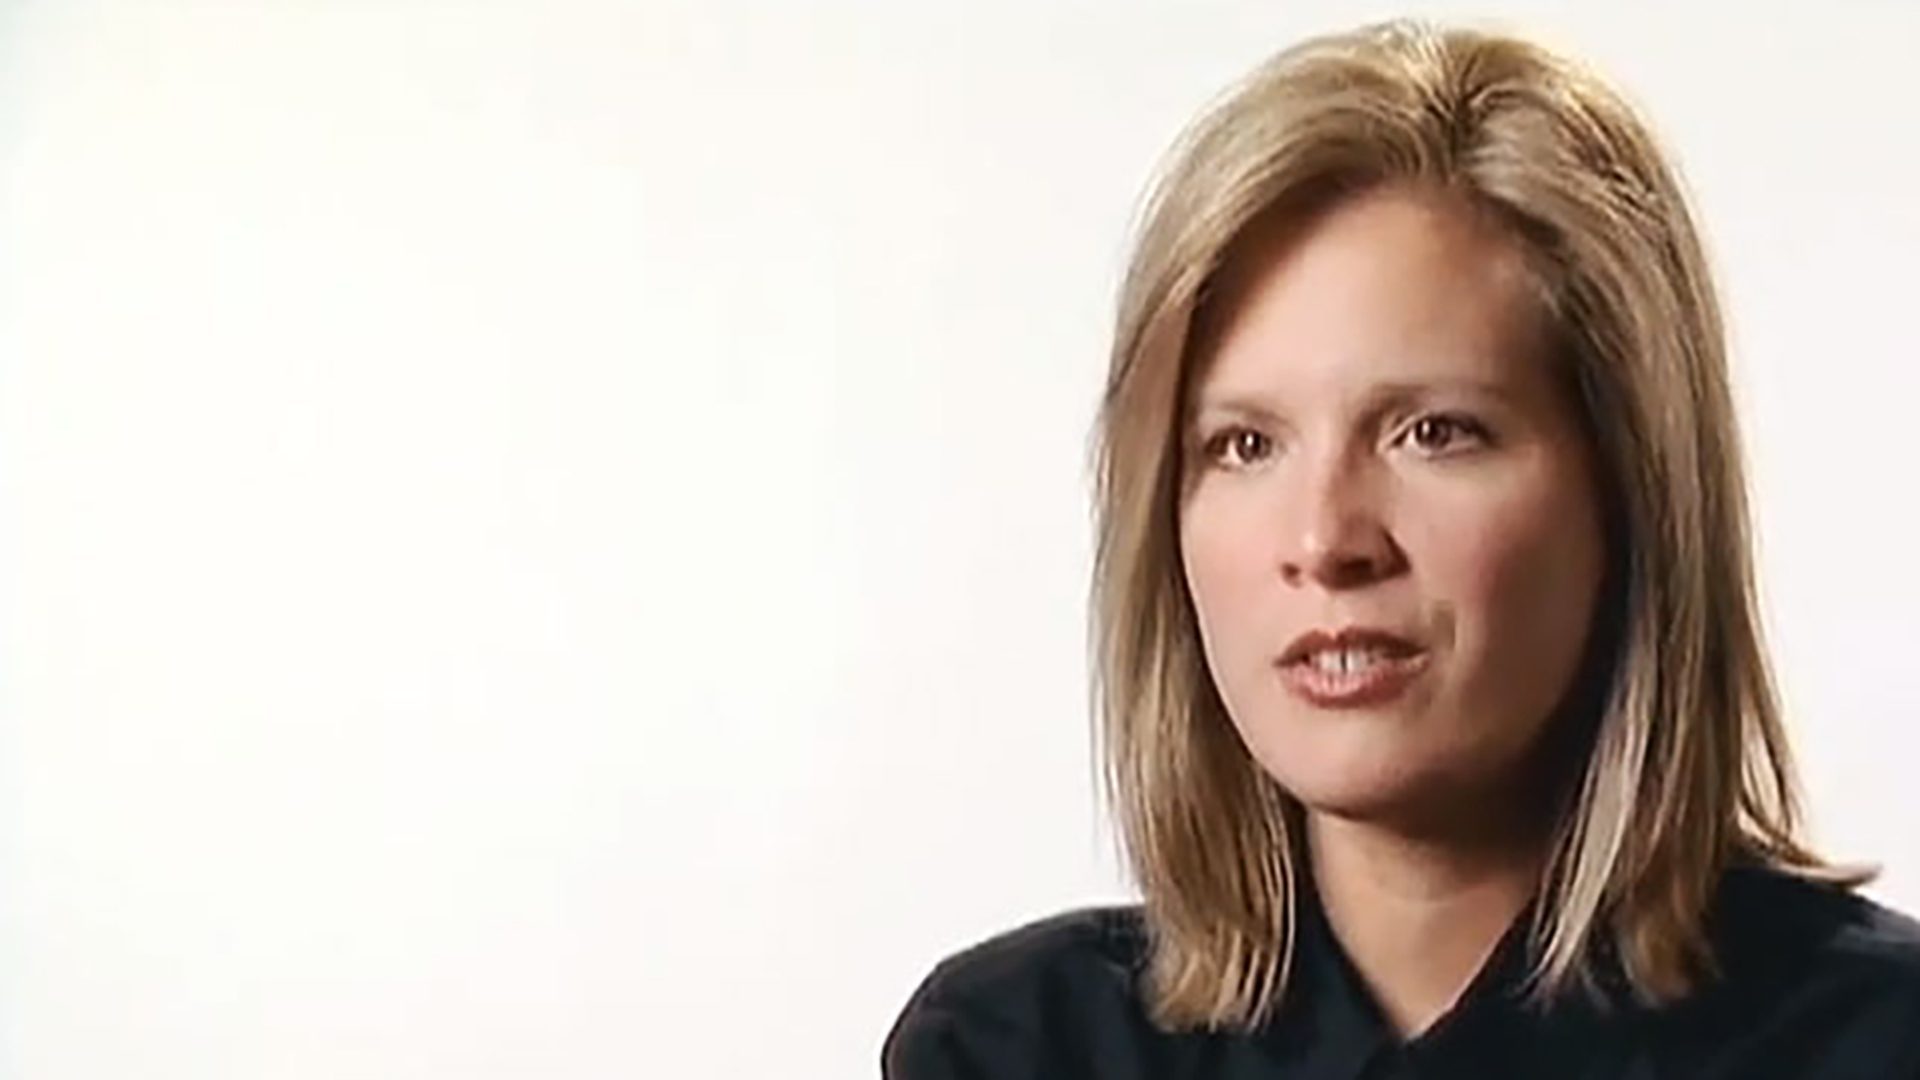 A young blonde woman wearing a black shirt is interviewed against a white background